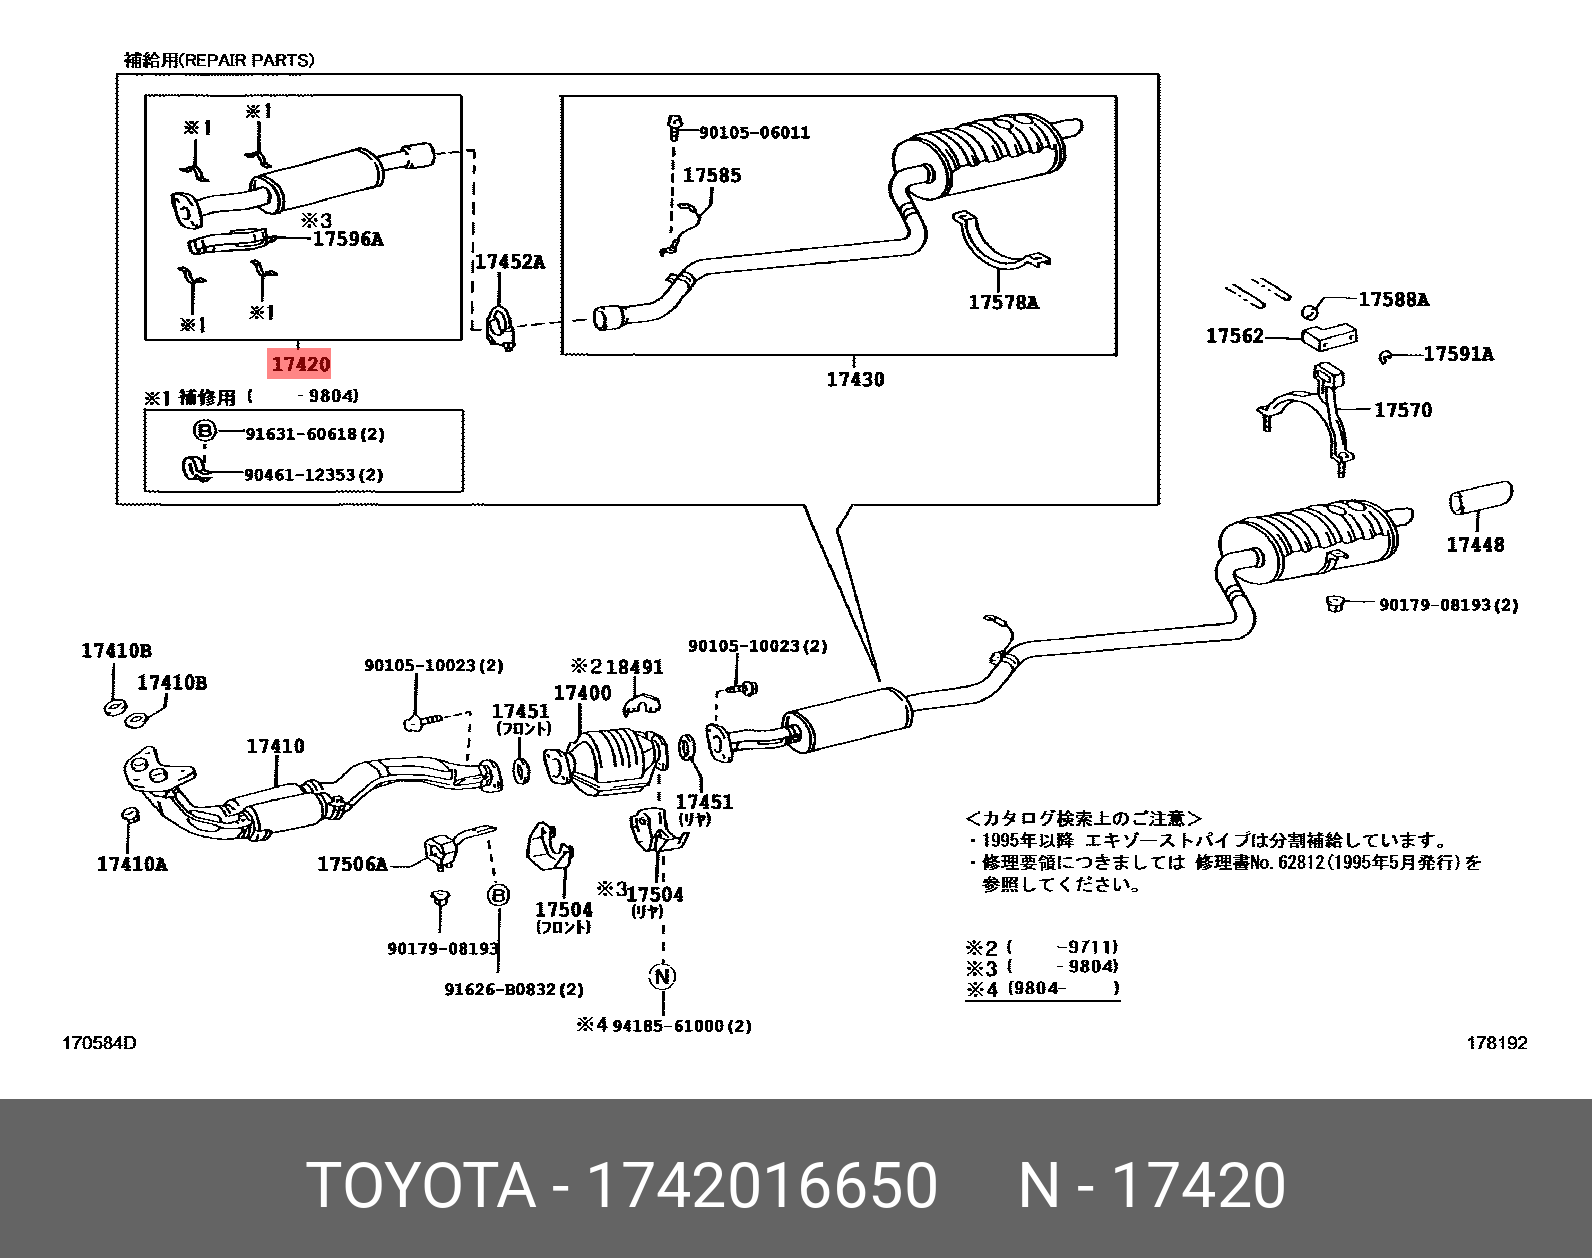 COROLLA 199505 - 200008, PIPE ASSY, EXHAUST, CENTER